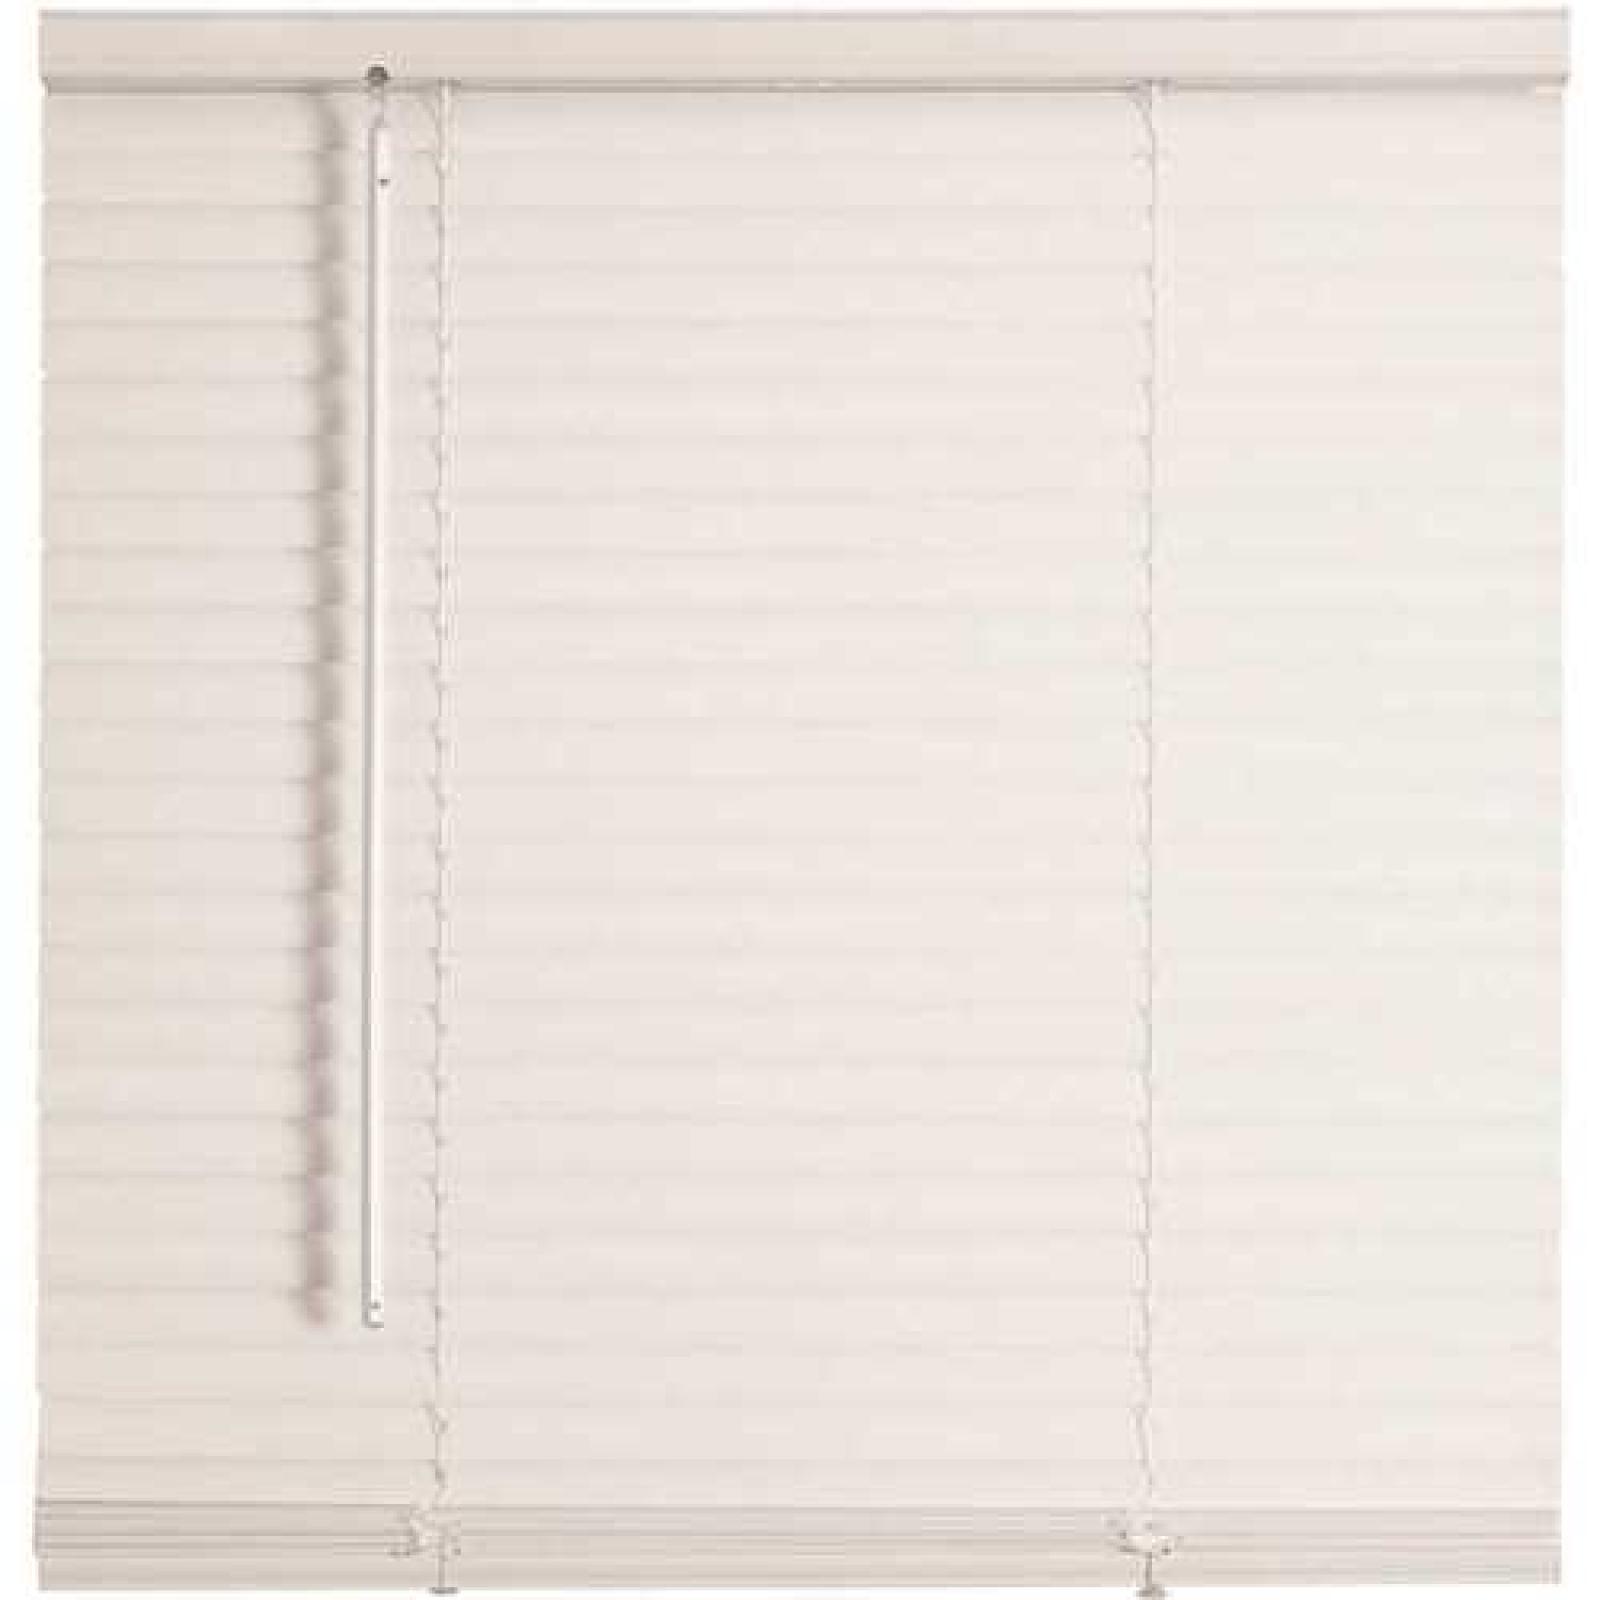 Phoenix Location Pallet of NEW ChampionChampion TruTouch White Cordless Light Filtering Vinyl Mini Blinds with 1 in. Slats 47 in. W x 60 in. L(184 Total Units)($8,800 Total Retail)